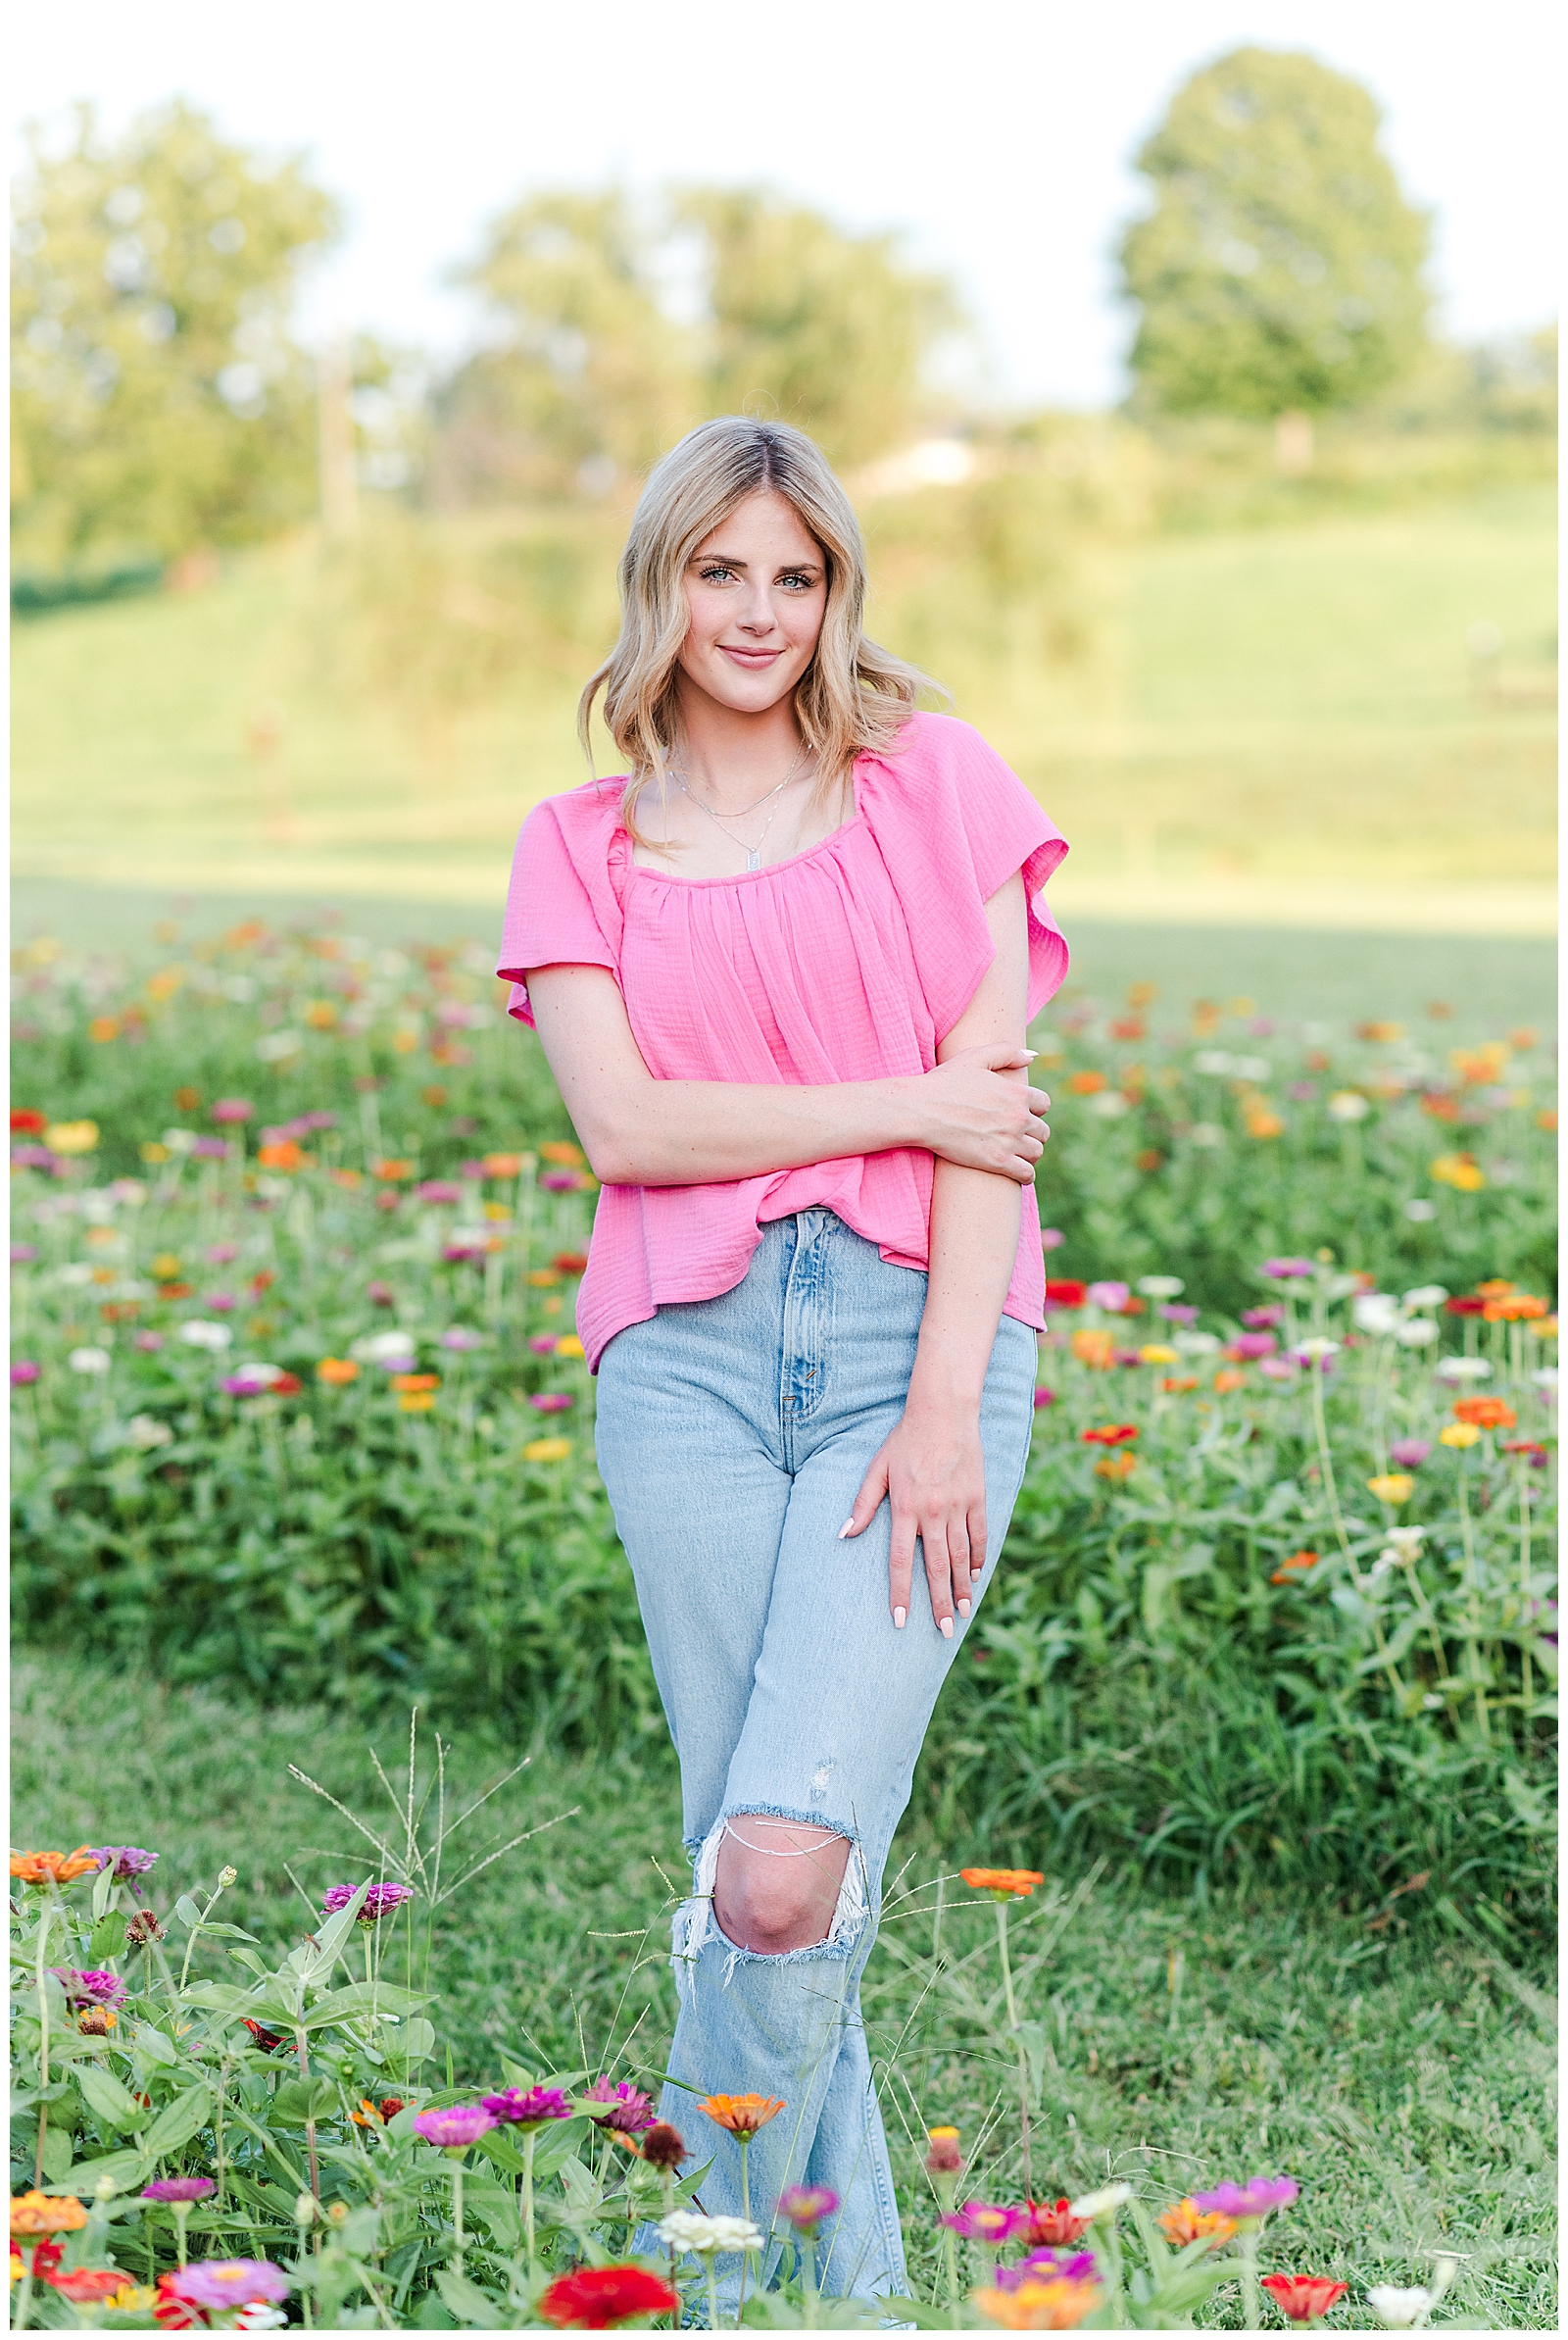 Senior girl wearing a pink top and jeans, standing in a field of wildflowers.